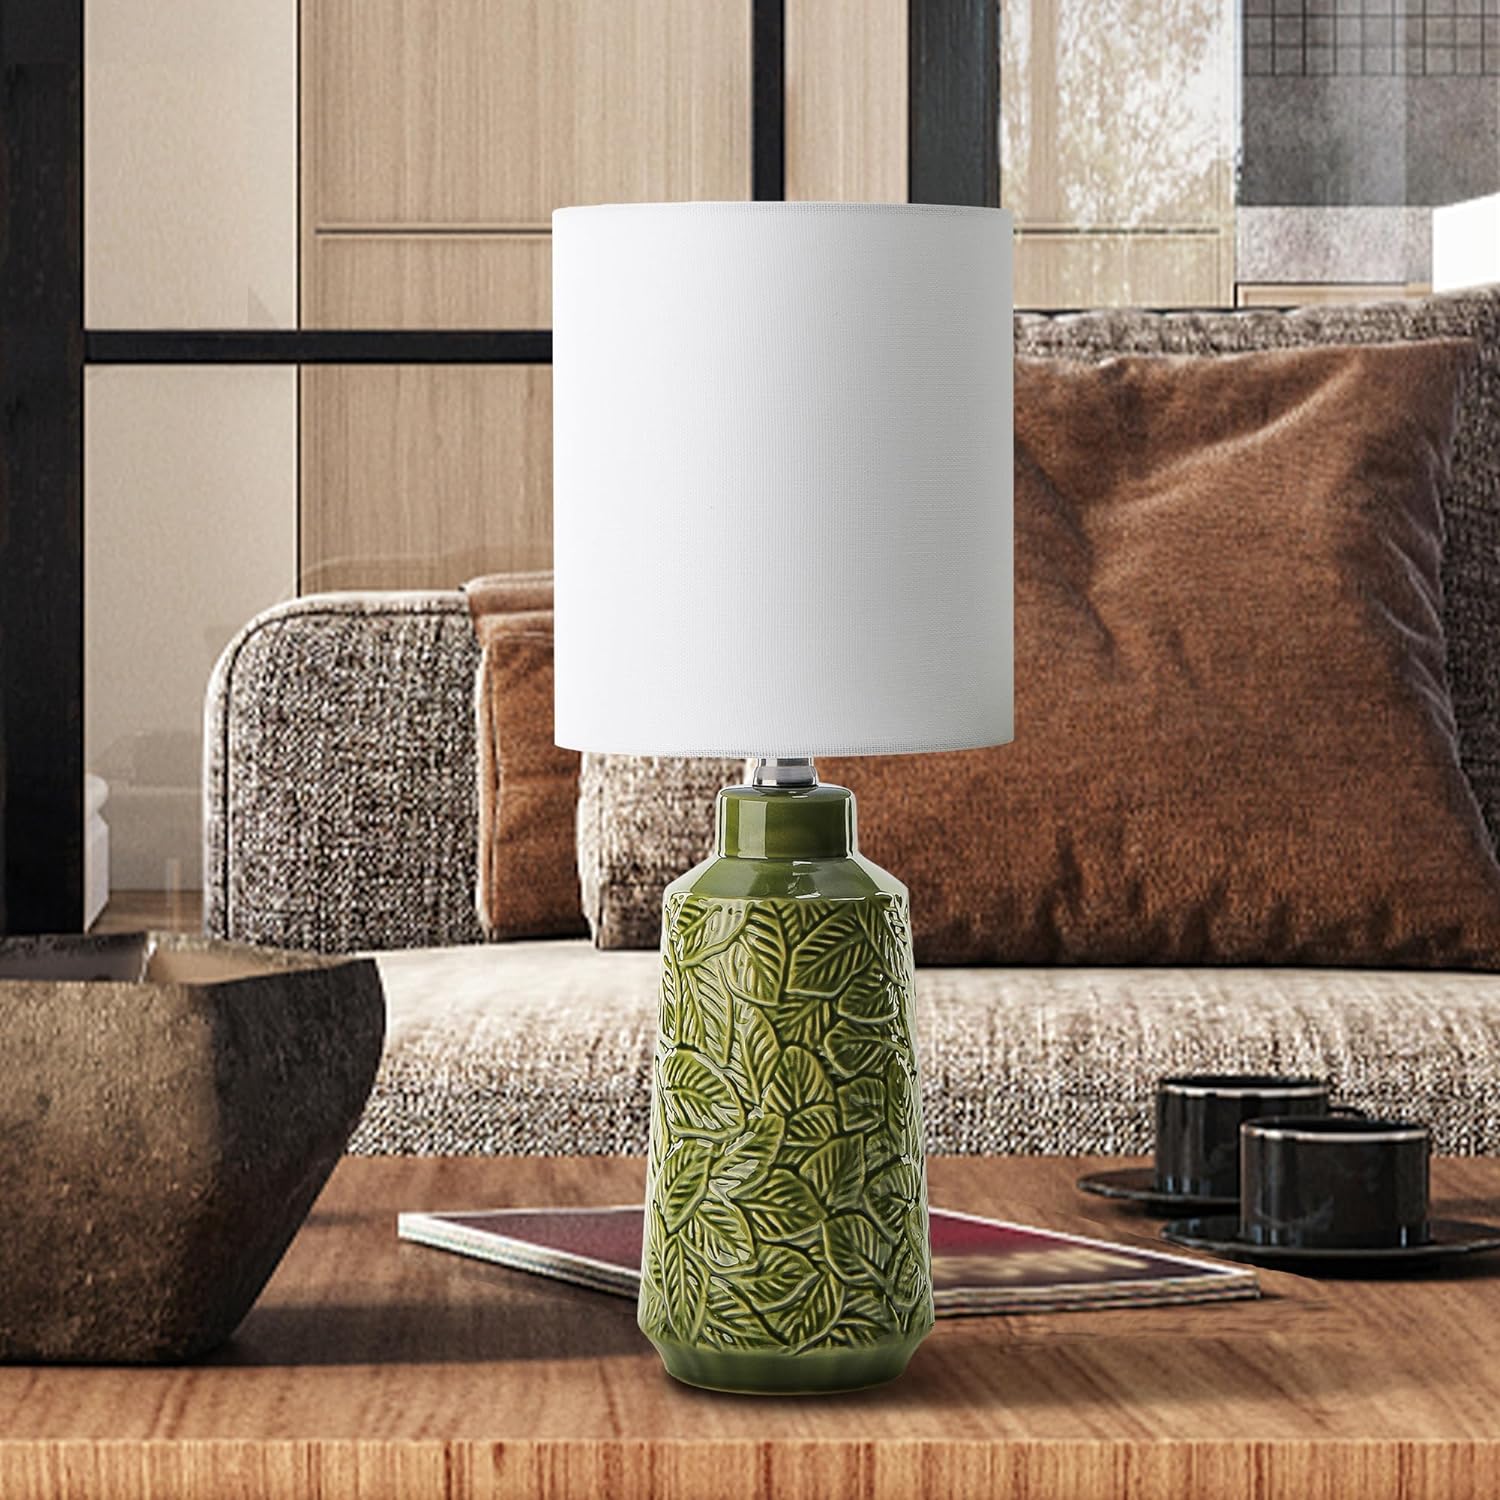 EUO Green Counter Kitchen Lamp